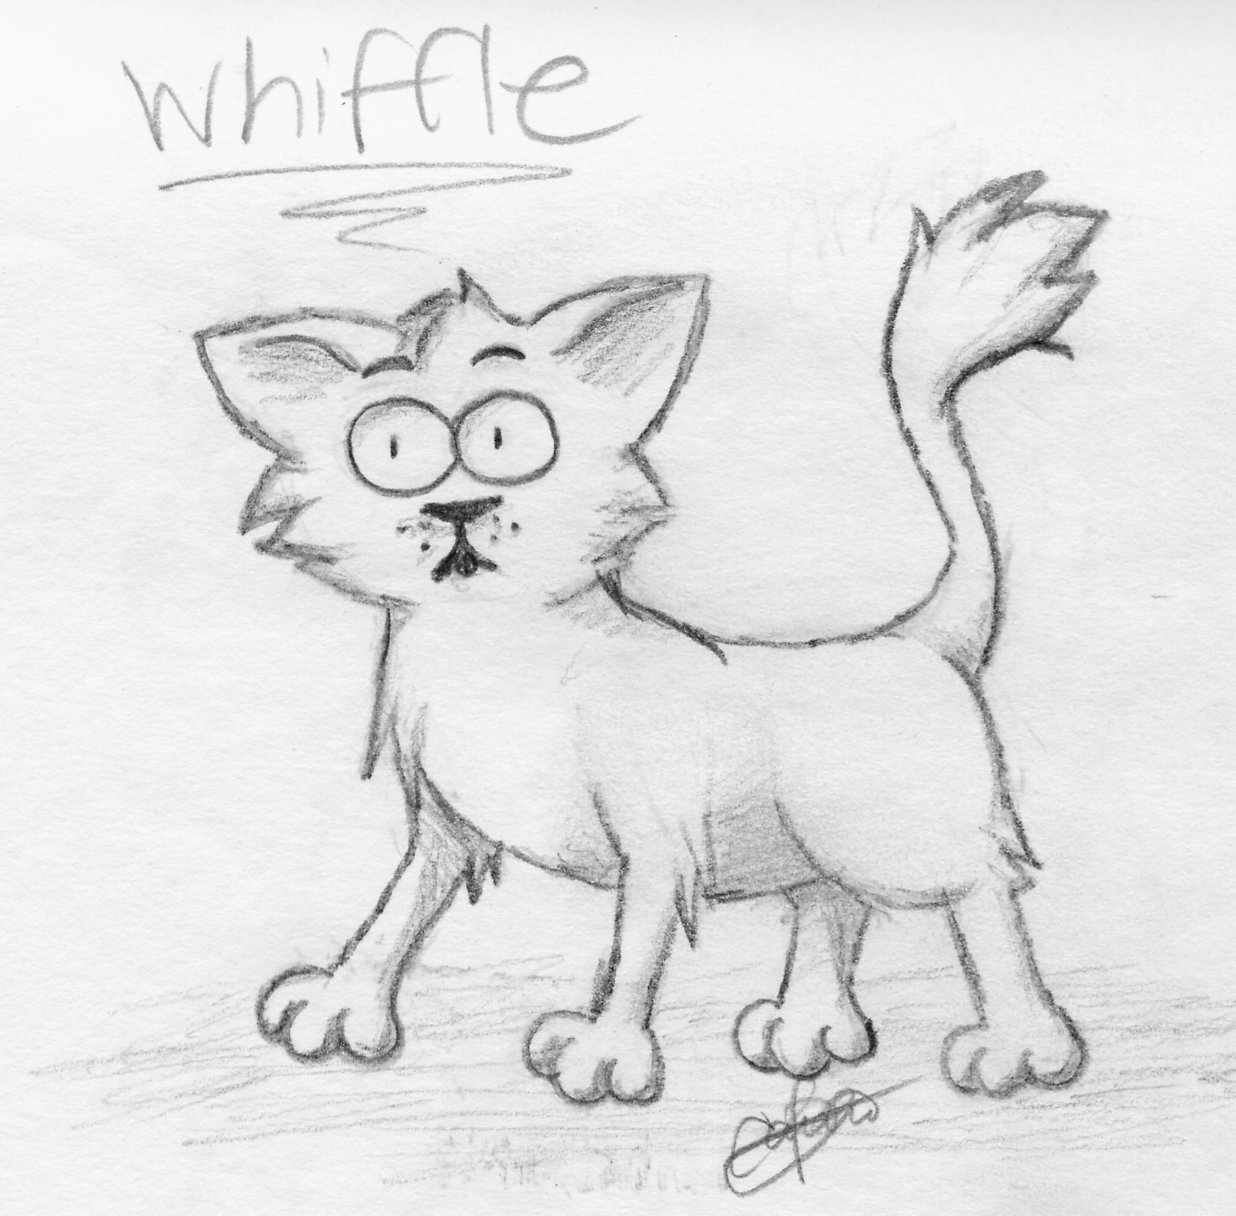 Whiffle by plungergirl